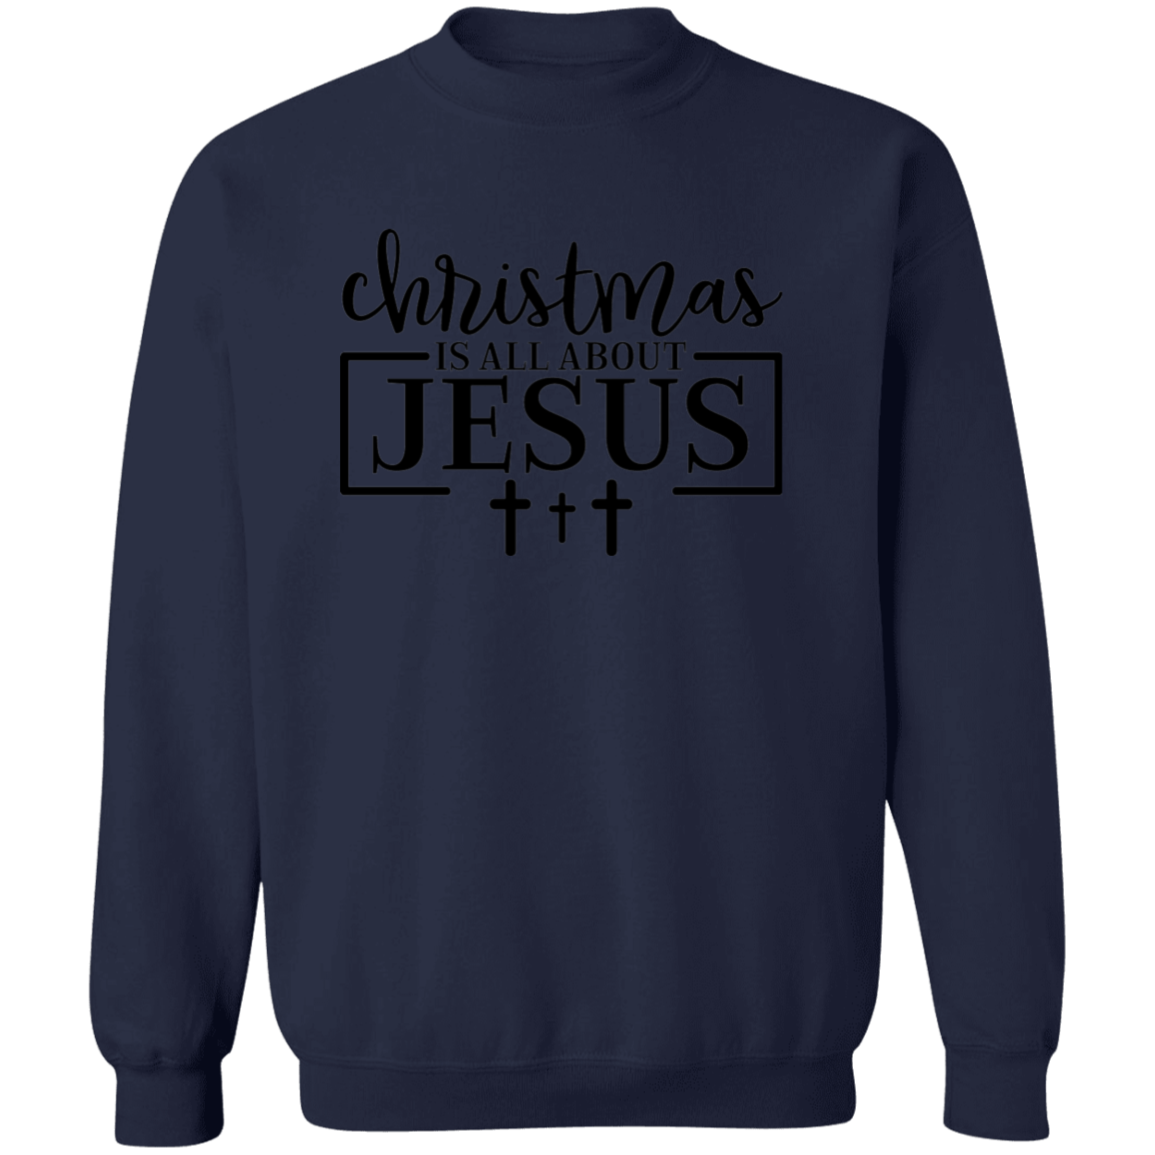 CHRISTMAS IS ALL ABOUT JESUS SWEATSHIRT, Christian Christmas sweater, Jesus sweatshirt